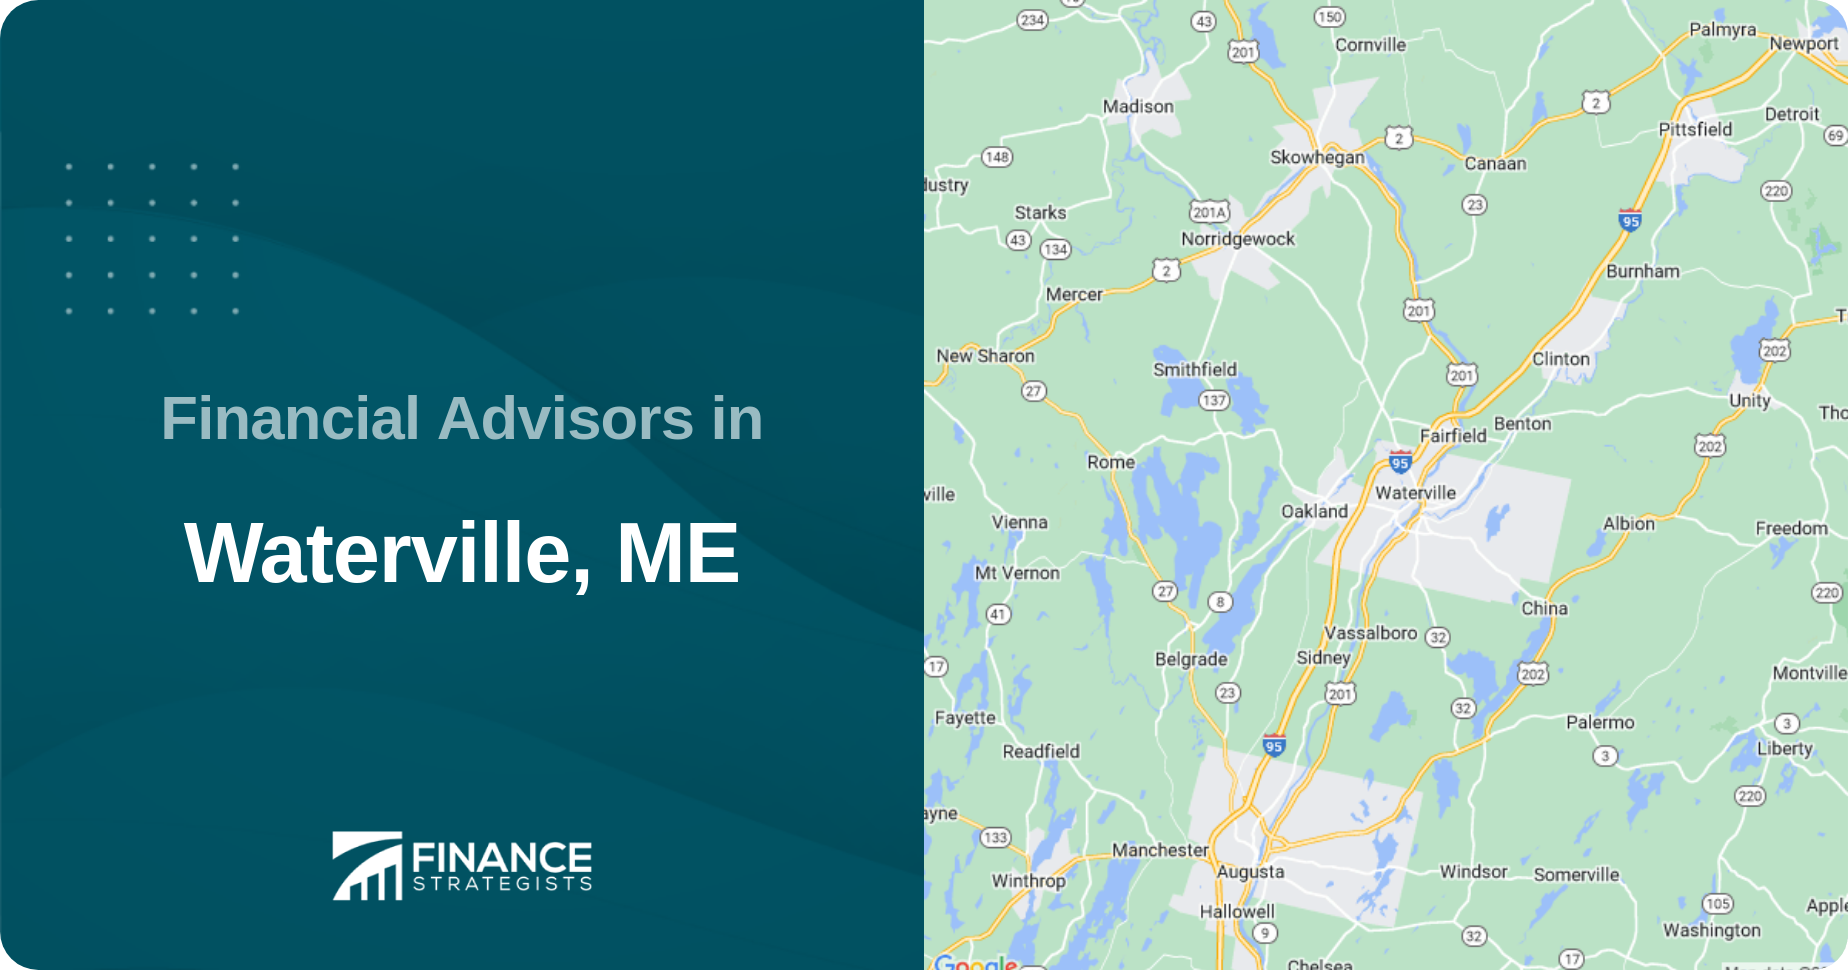 Financial Advisors in Waterville, ME